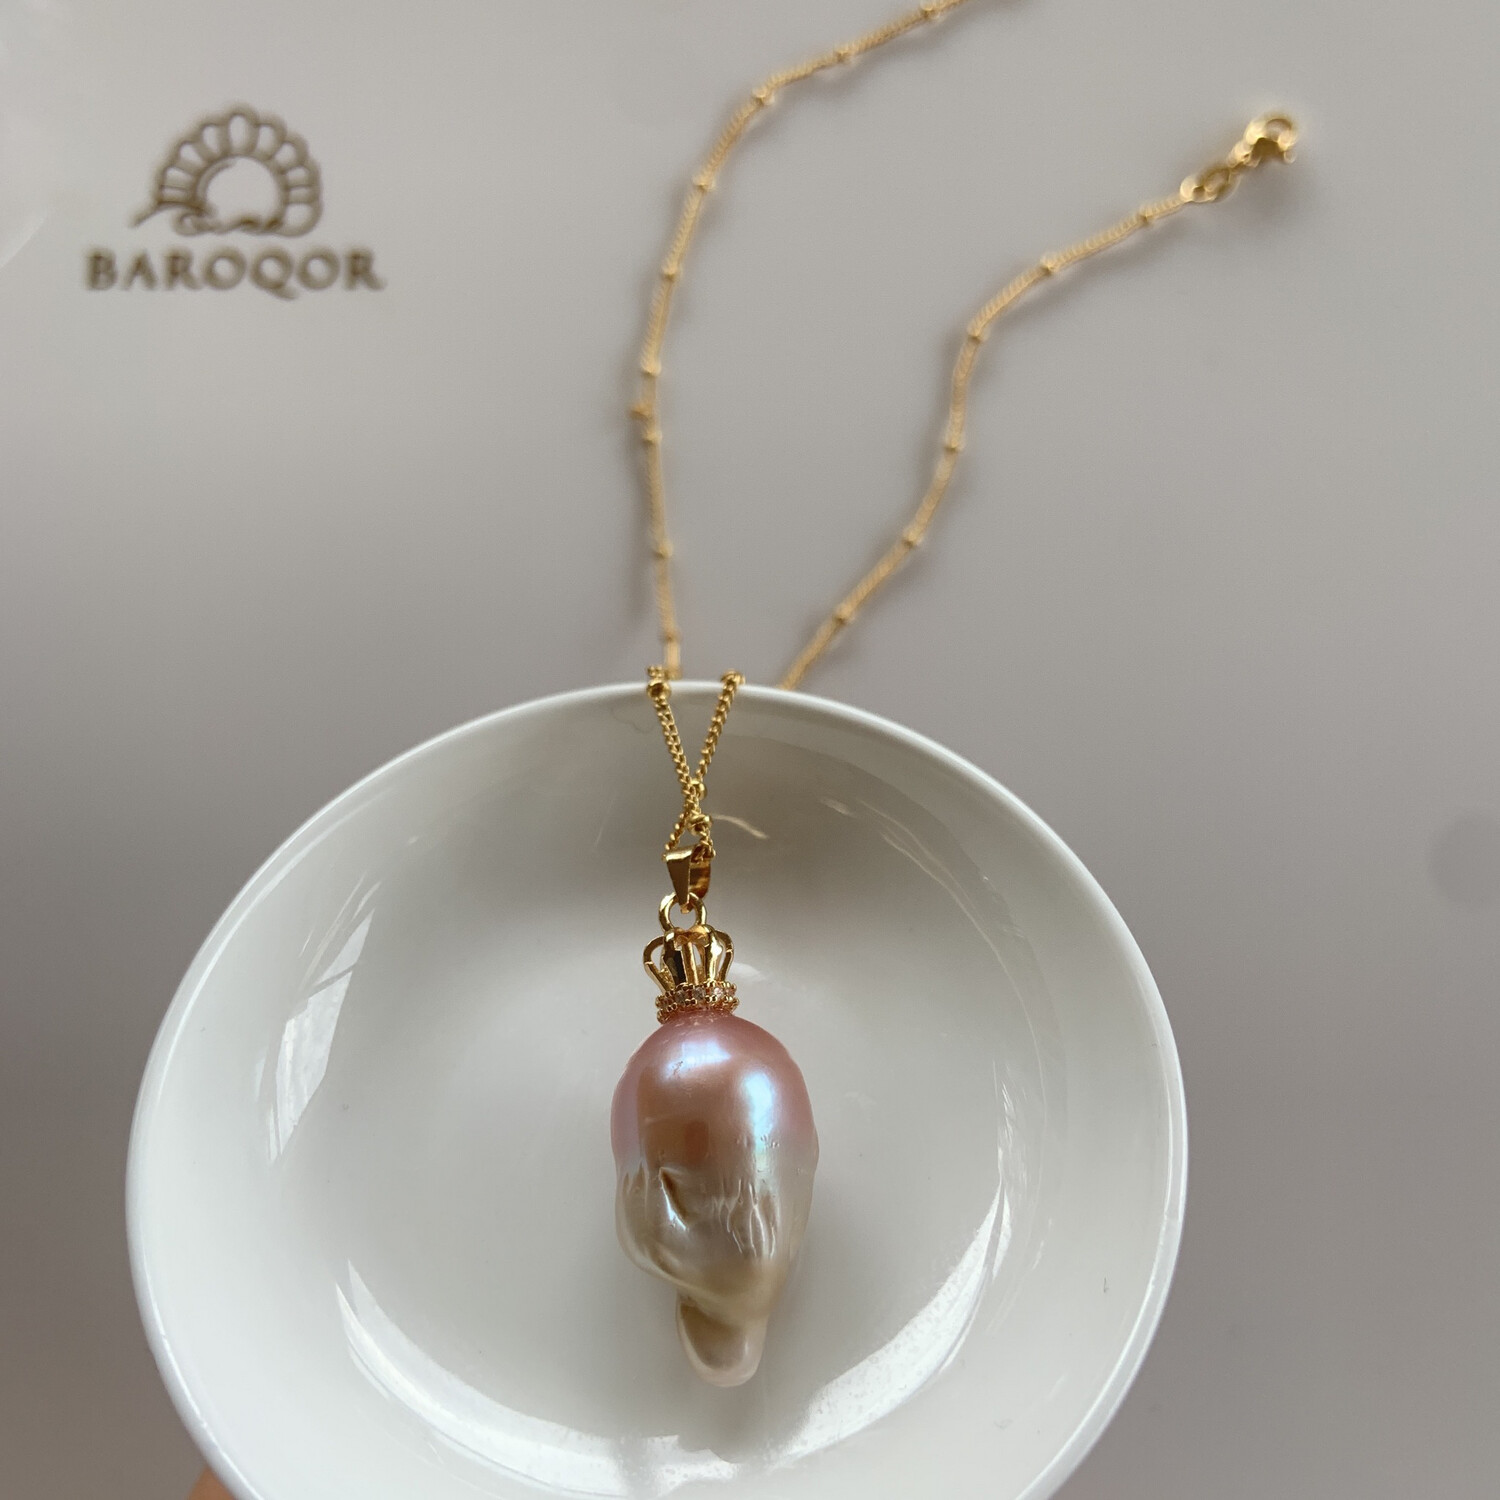 ‘Egyptian Princess’ Pearl Necklace